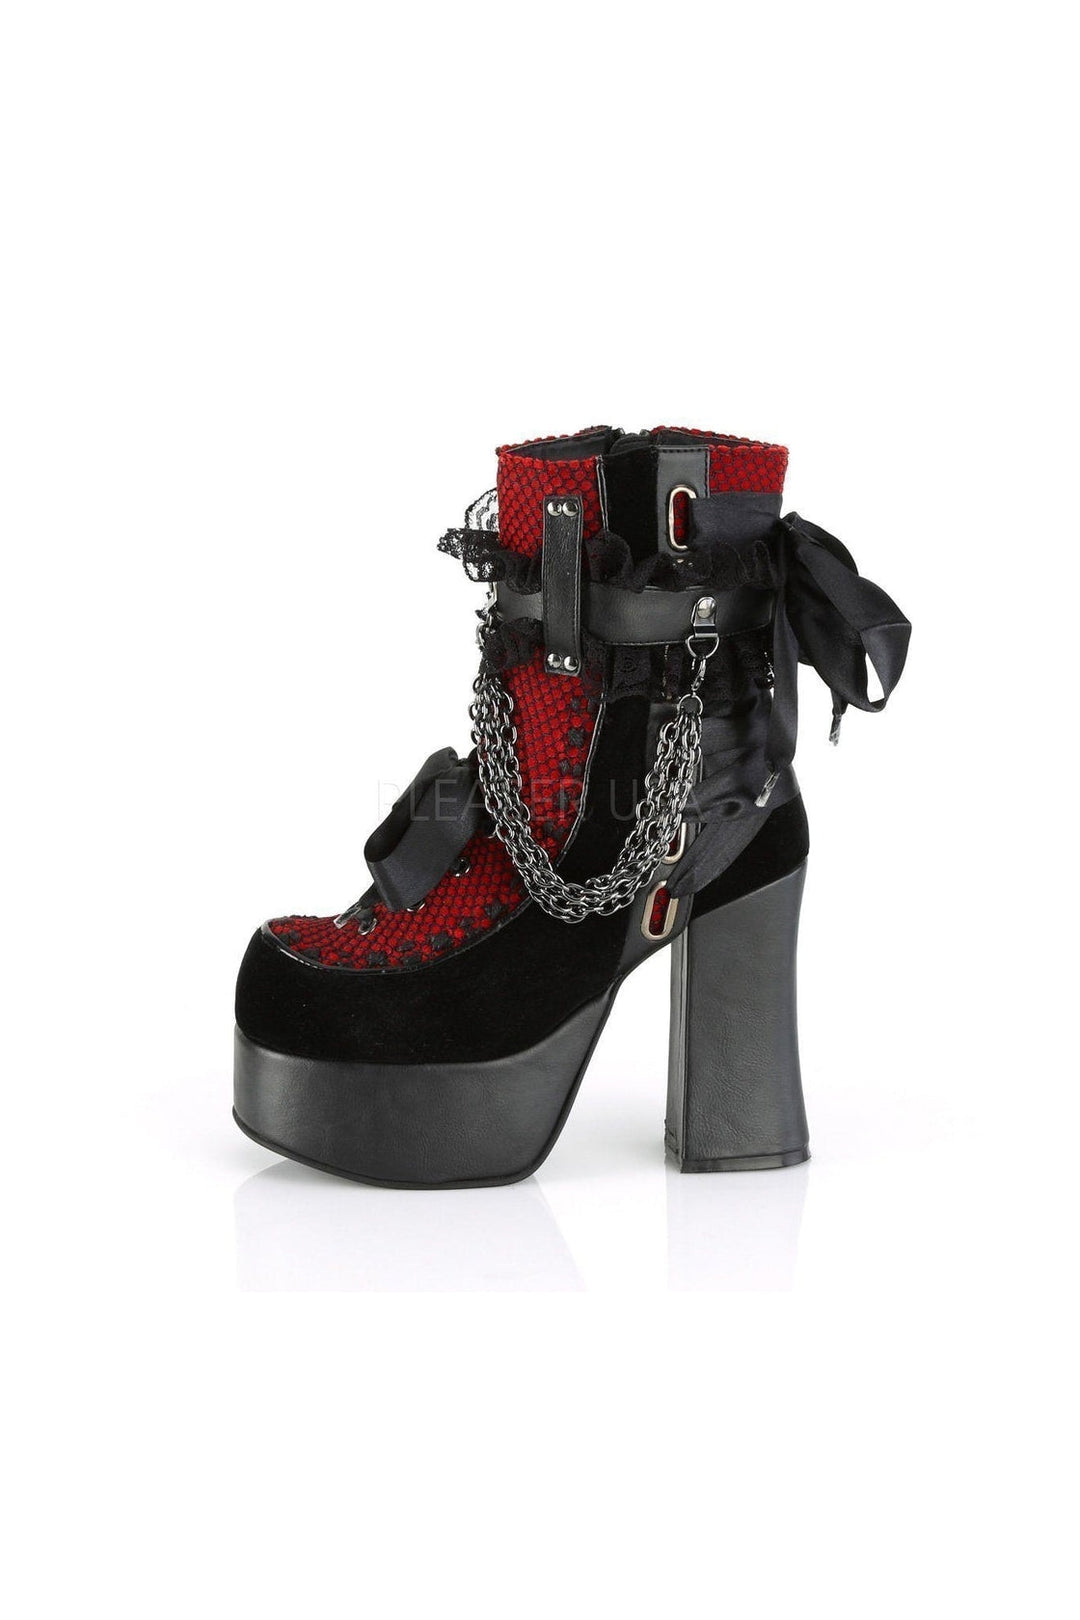 CHARADE-110 Demonia Ankle Boots | Black Faux Leather-Demonia-SEXYSHOES.COM